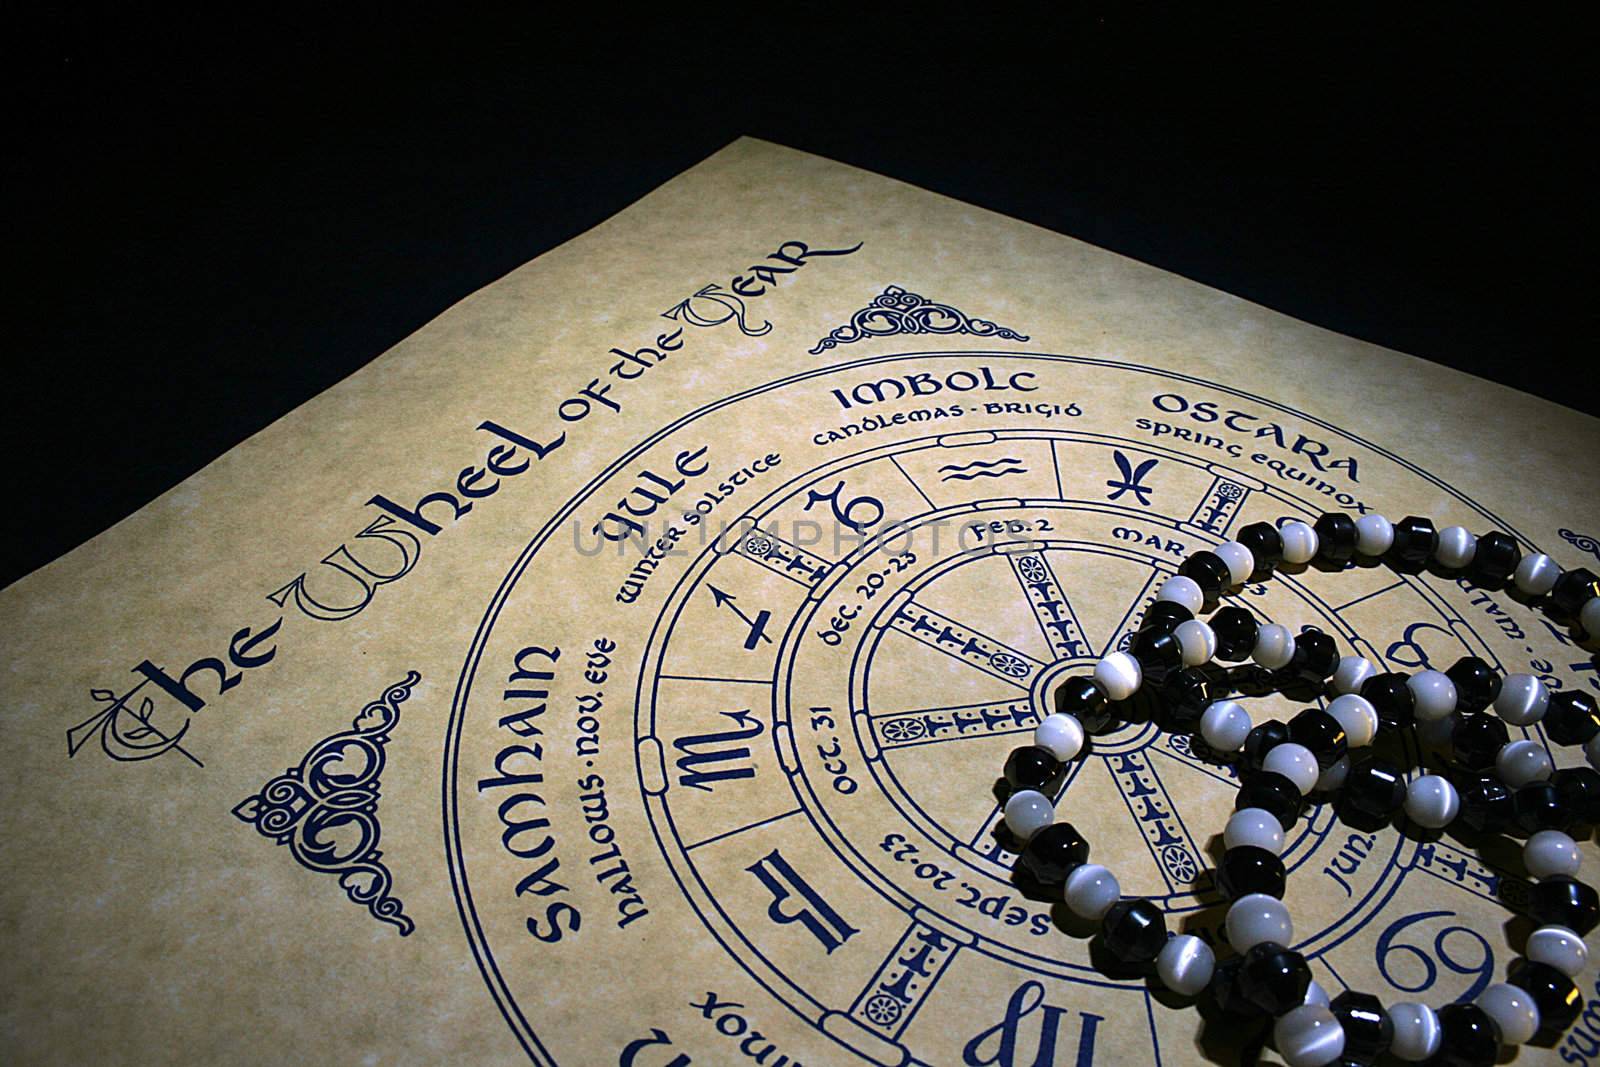 Spiritualistic beads from the ground stones and an astrological card for predictions.